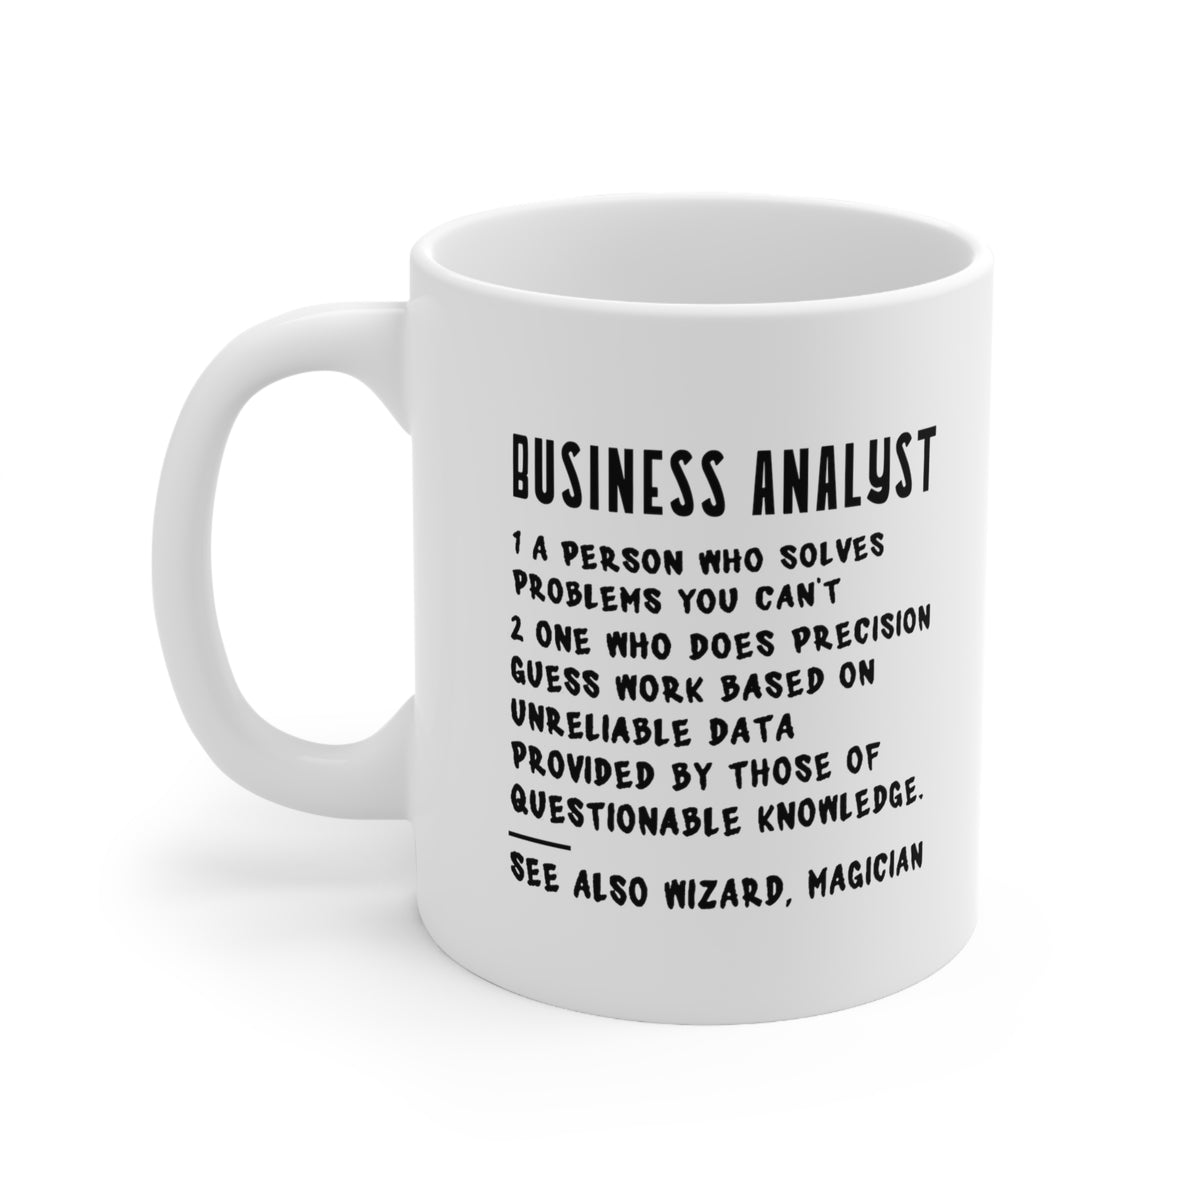 Business Analyst. 1 A Person Who Solves Problems You Can’t Perfect Tea Cup & Coffee Mug For Business Analyst